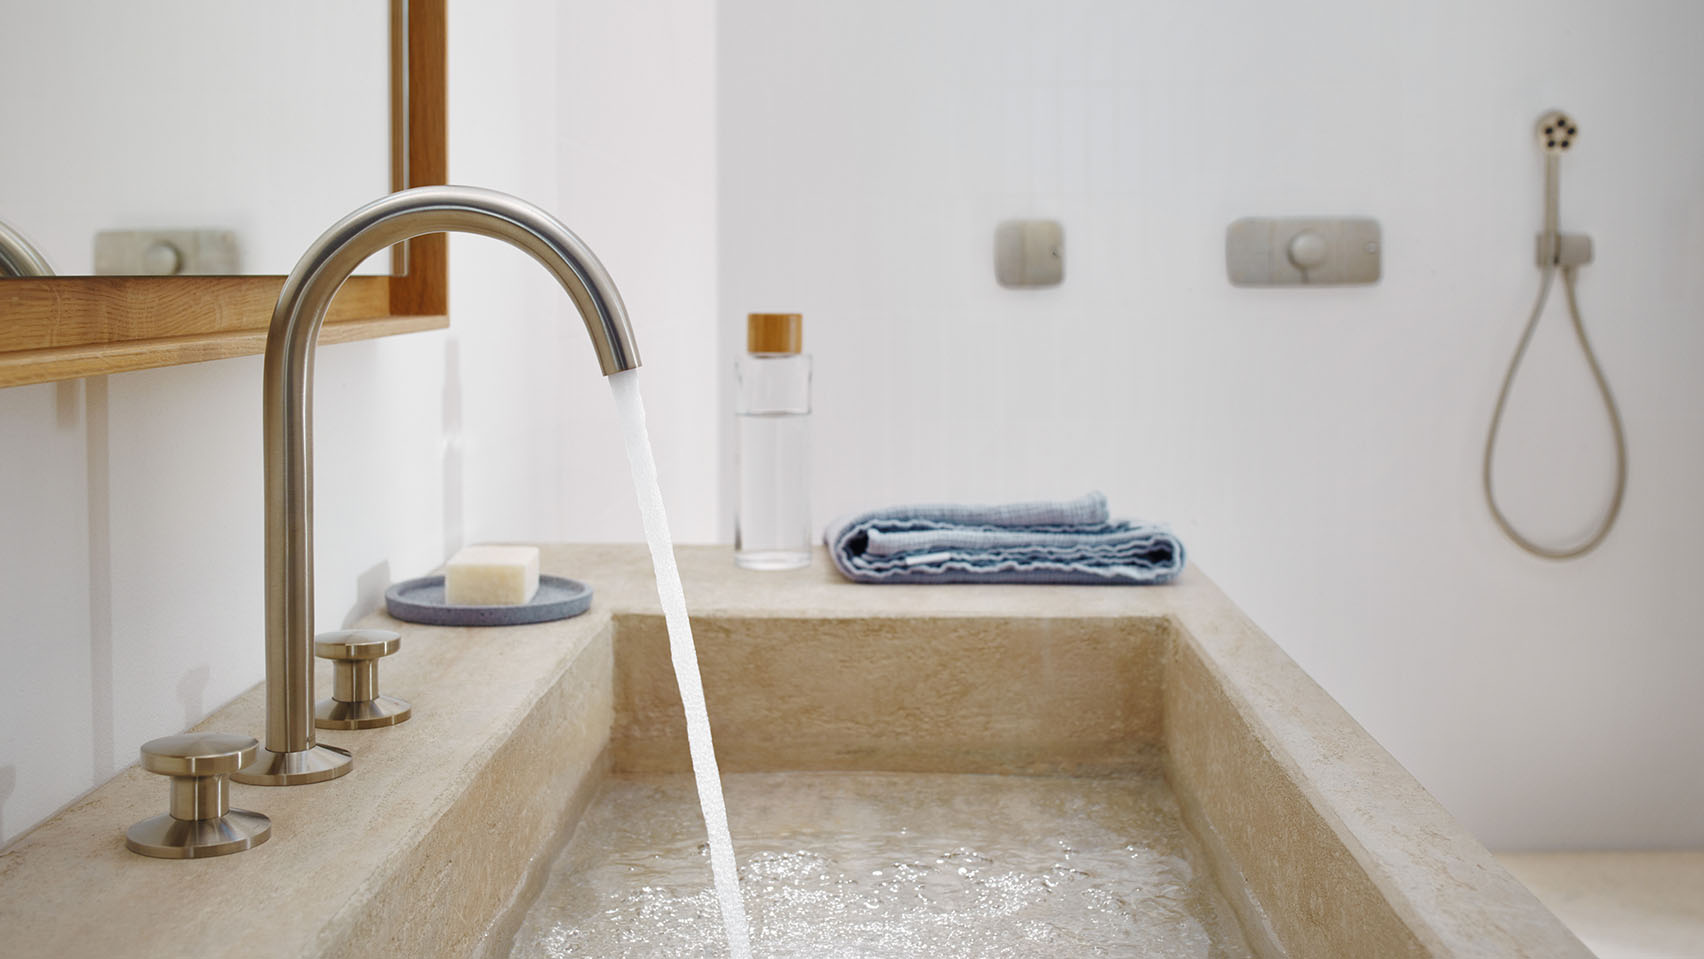 AXOR minimalist collection of faucets by and